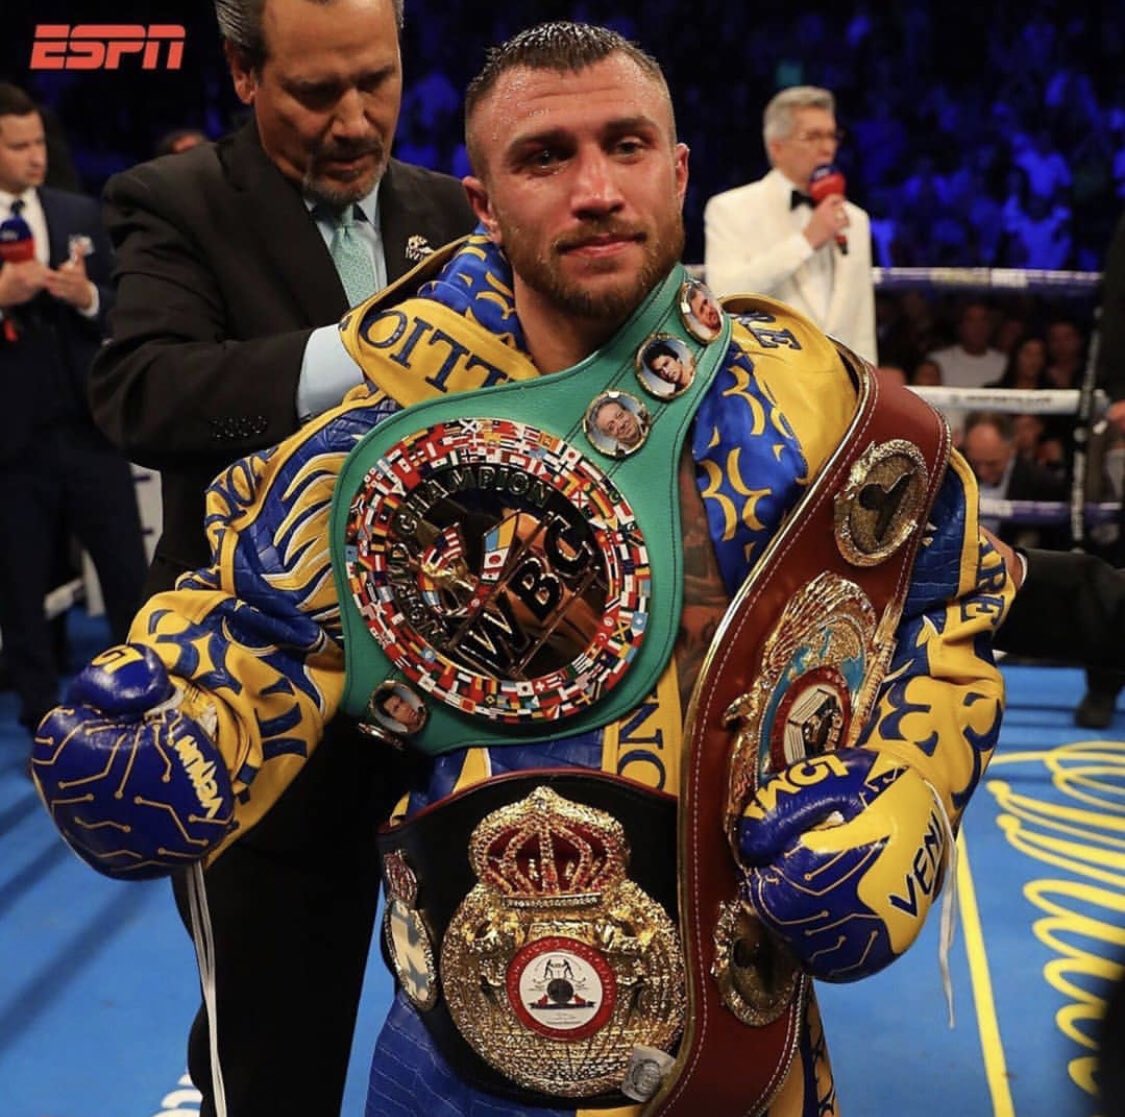 Incredible stats for an incredible fighter! 

Boxing record 416-2...
14/15 fights have been world title fights...
3 weight world champion...

A future hall of famer no doubt about it!  #boxing #LomaCampbell
#Lomachenko